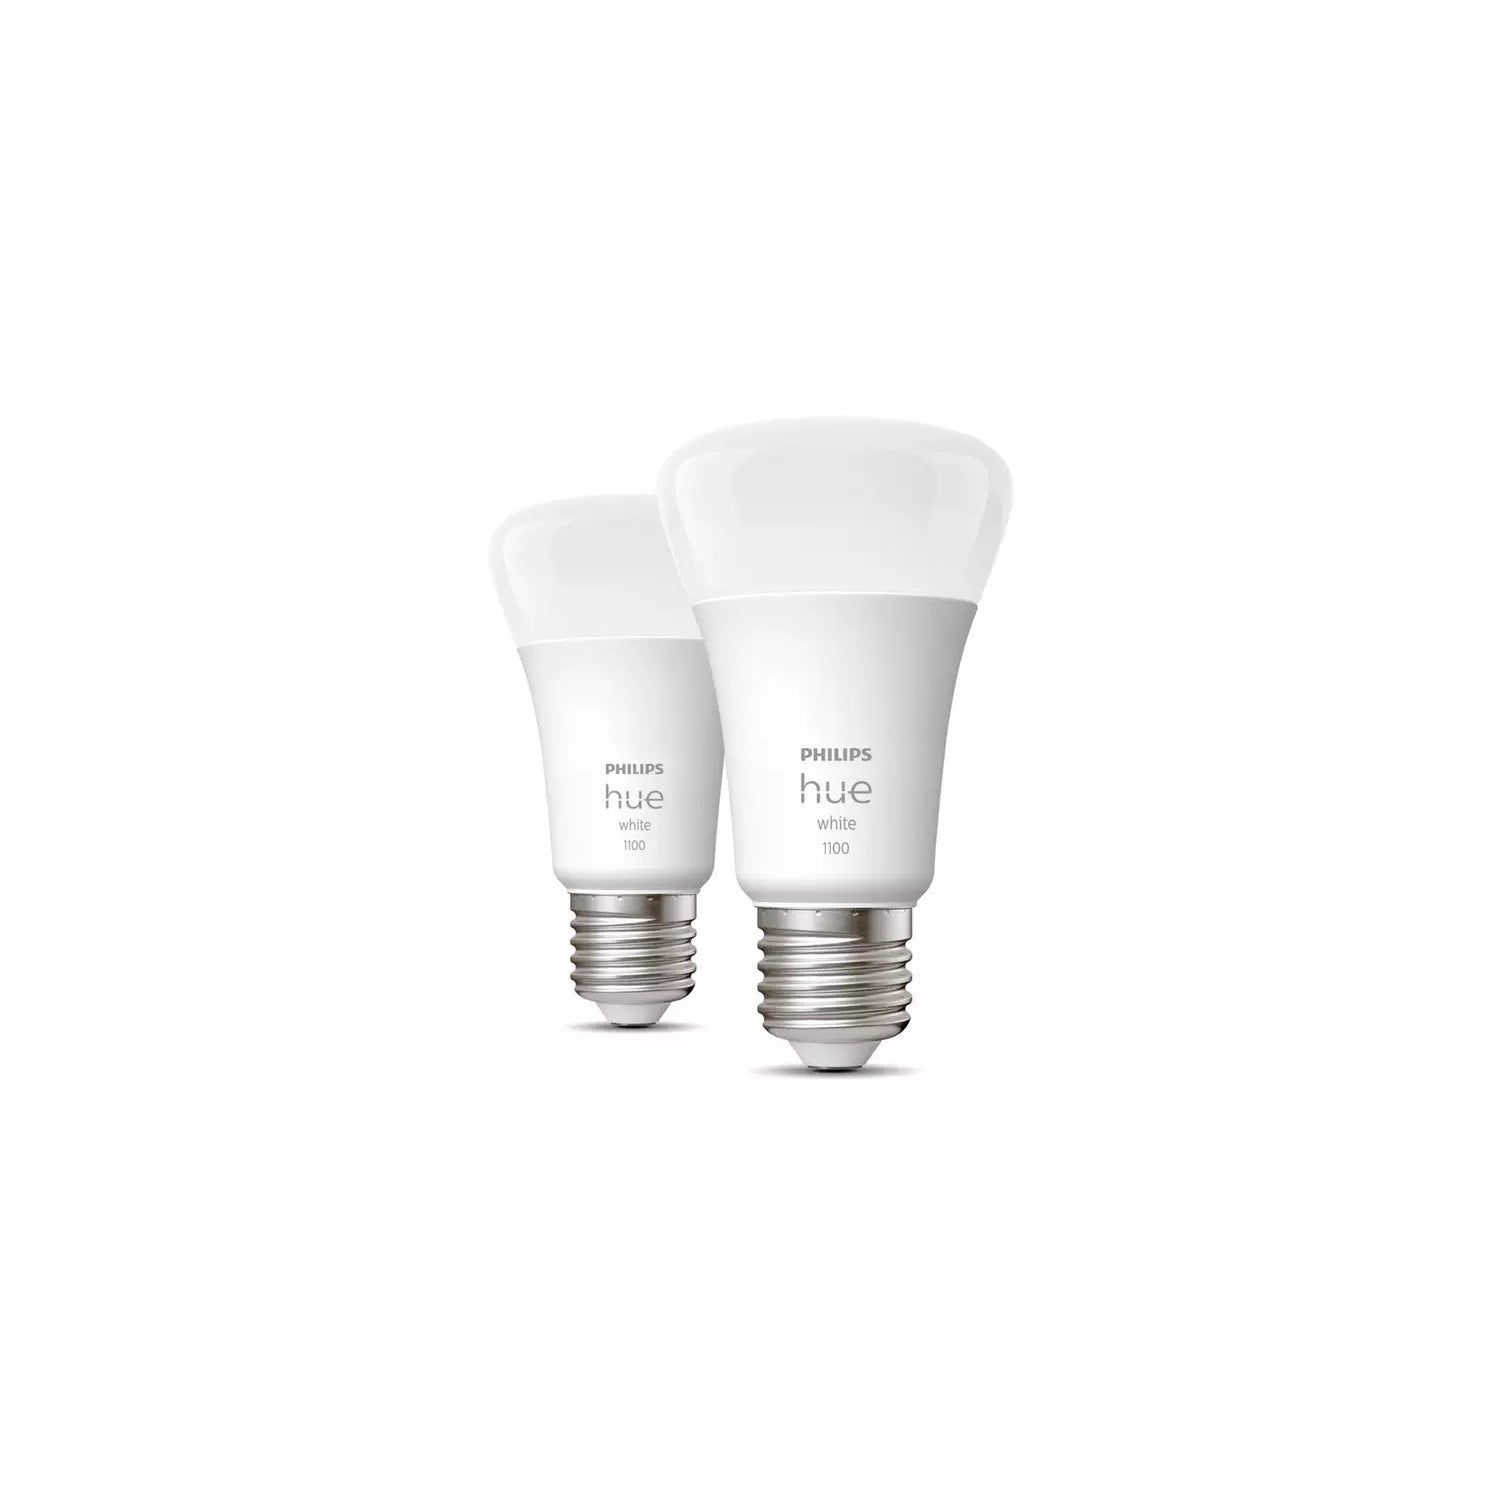 Philips Hue E27 White Smart Bulb With Bluetooth - 2 Pack - New